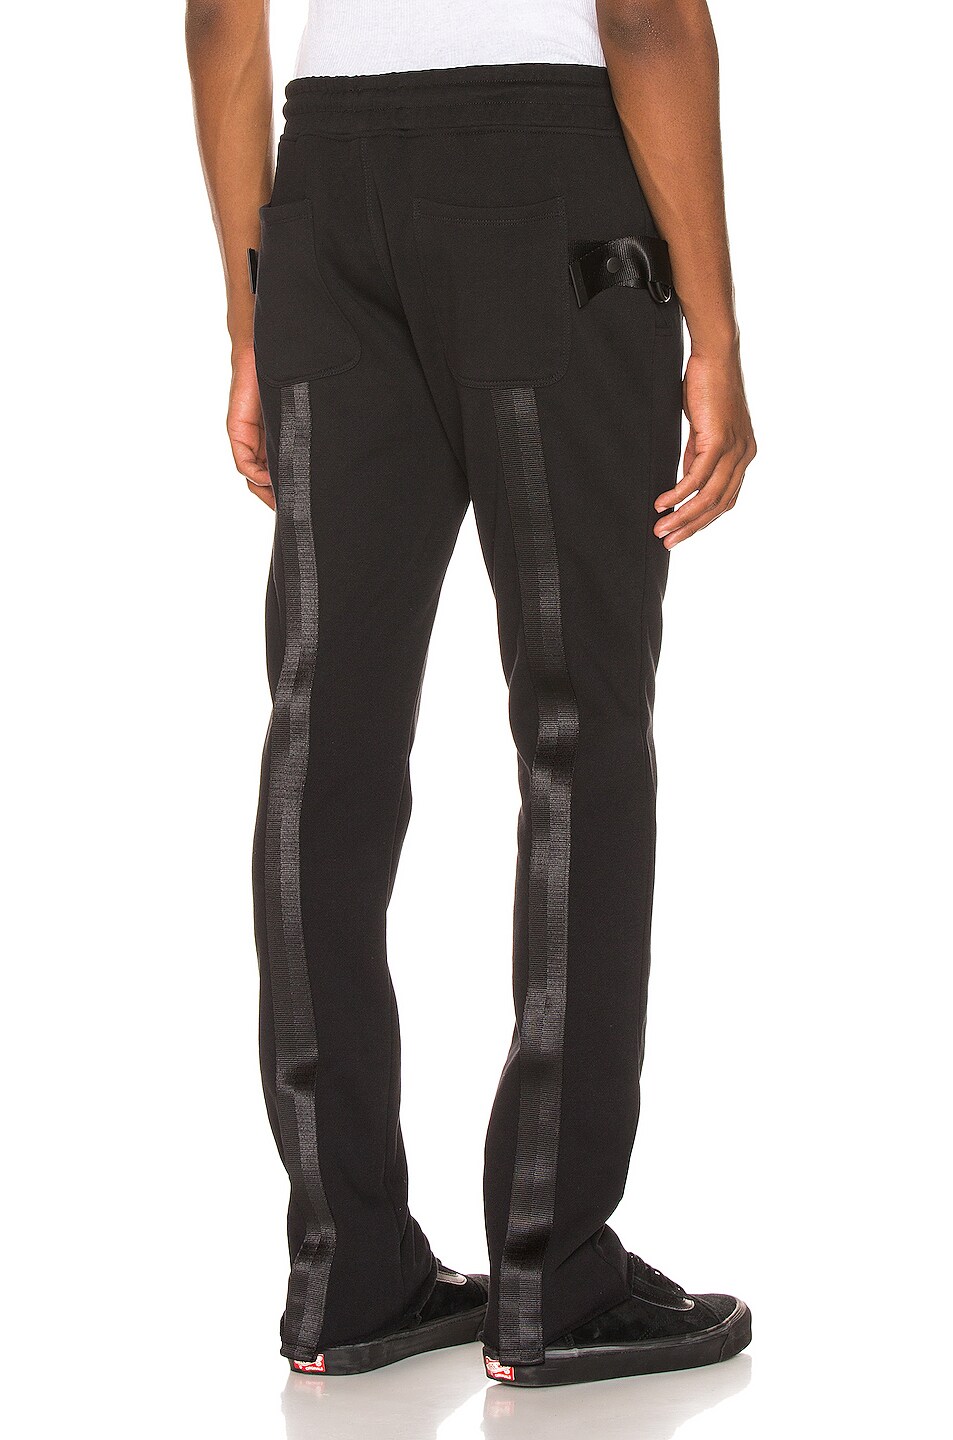 Image 1 of RTA 0135 Pants in Black Tactical